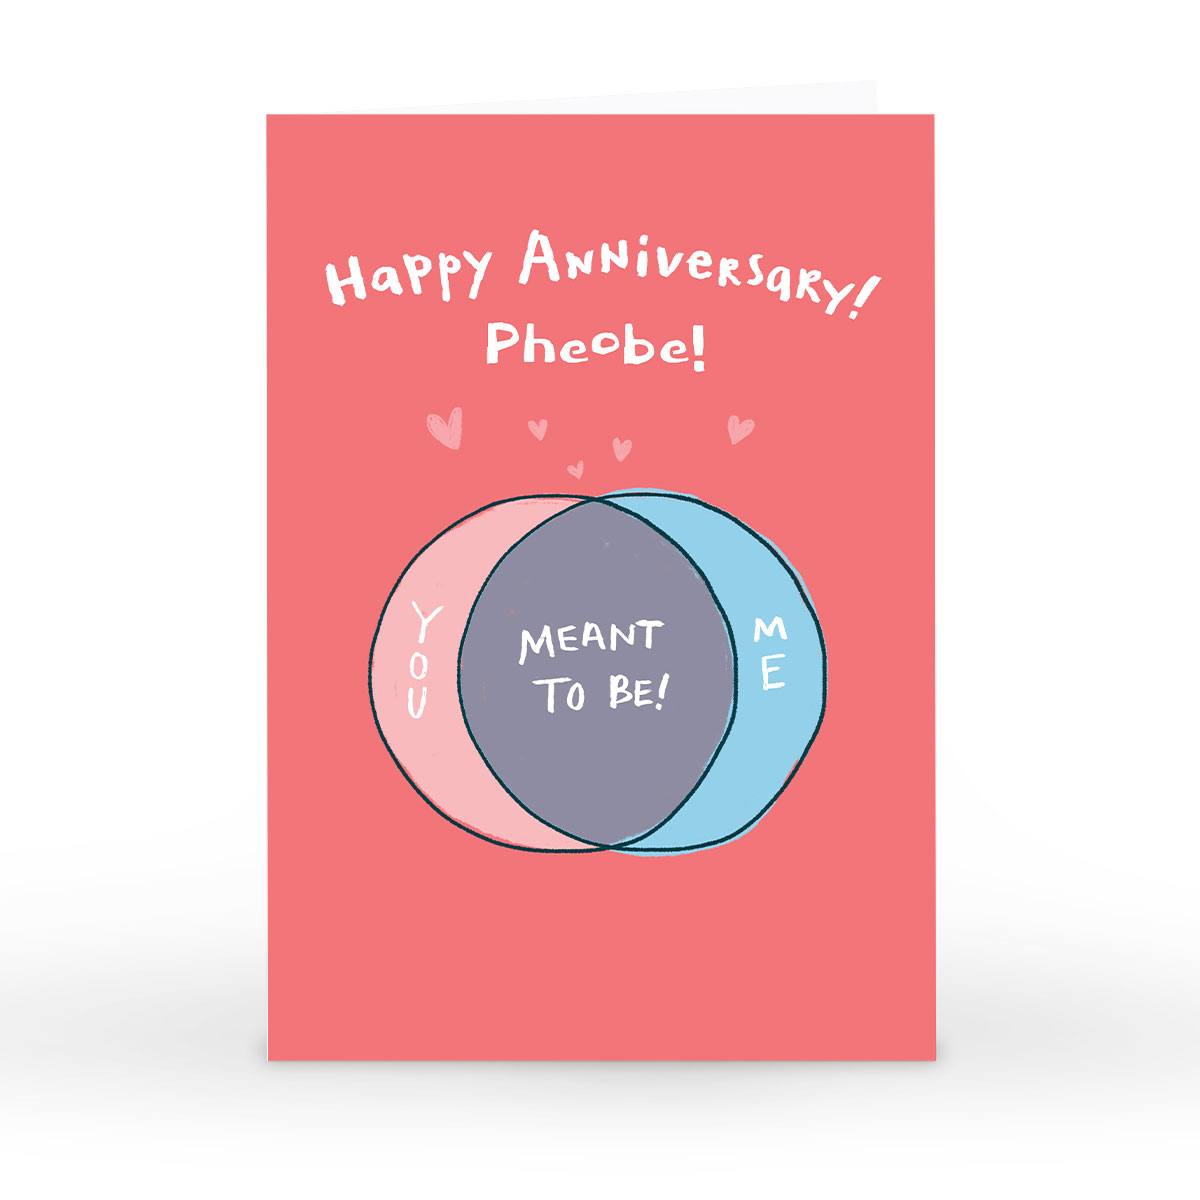 Personalised Hew Ma Anniversary Card - Meant To Be!